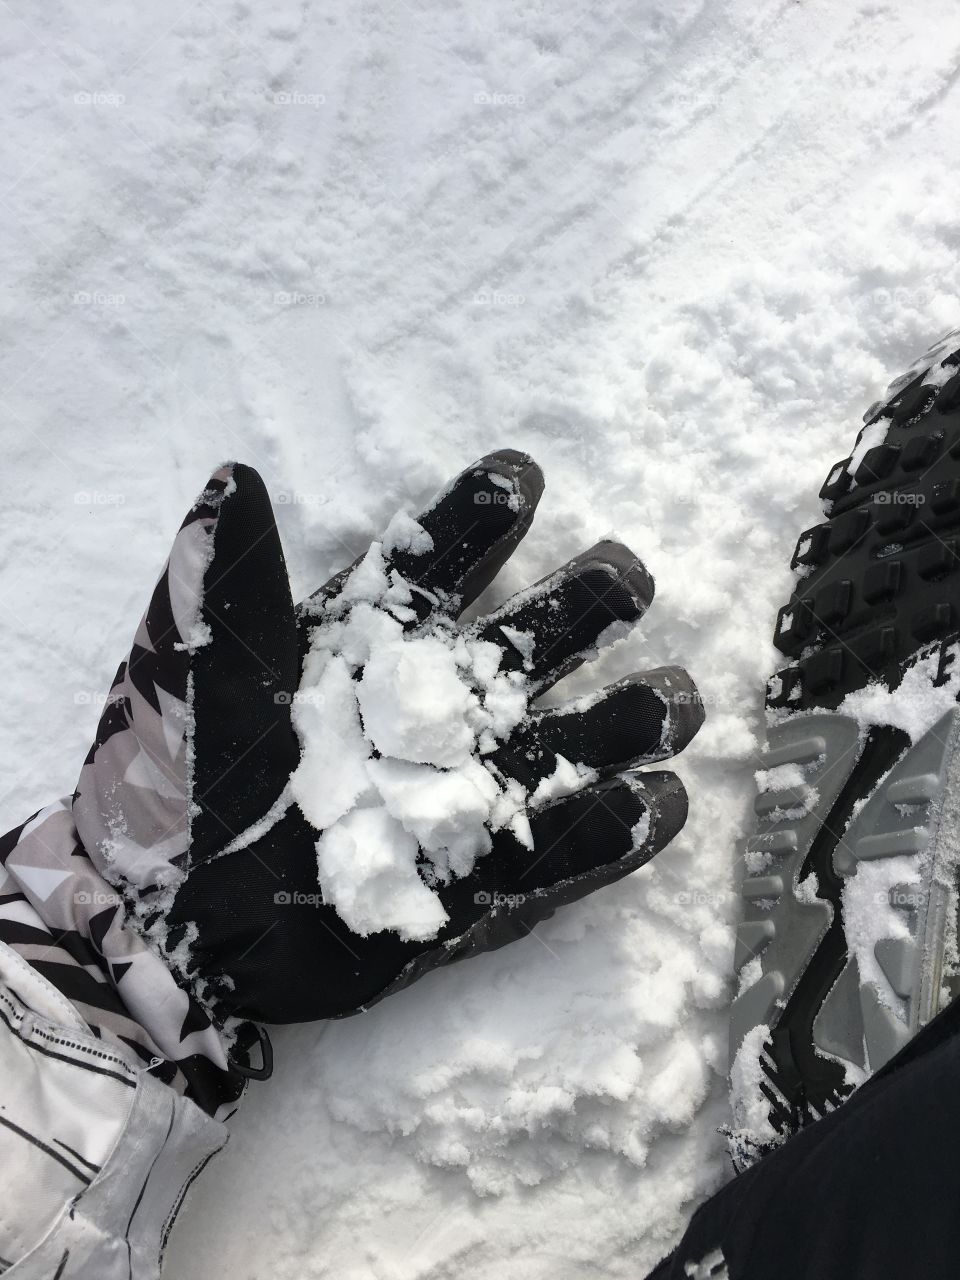 Close-up of person's hand in snowy weather